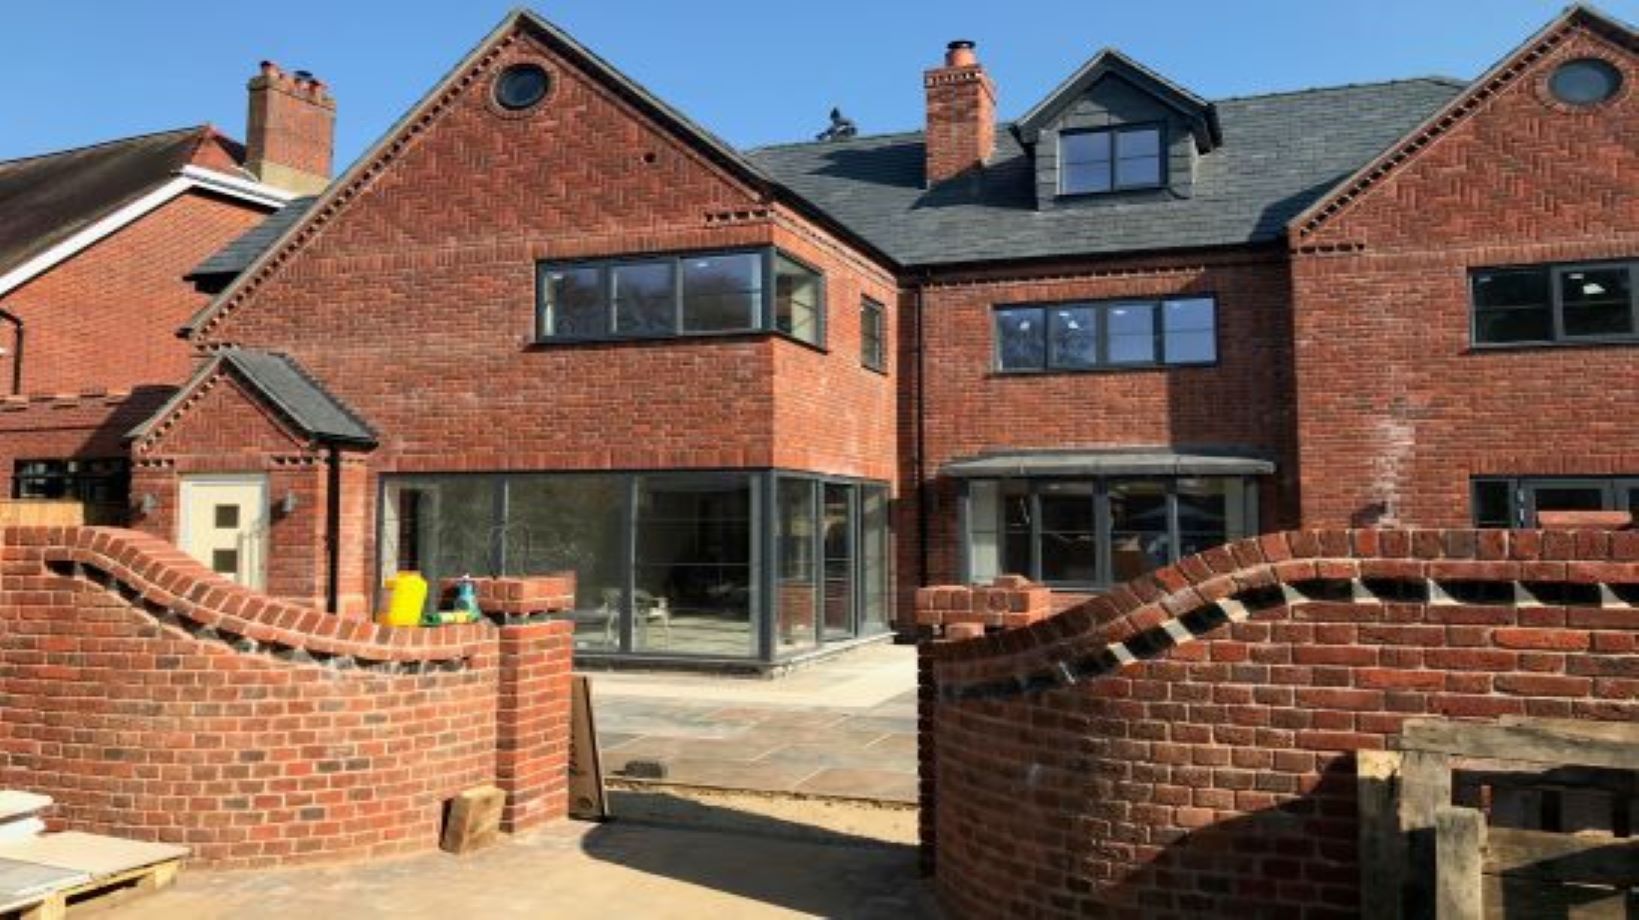 Major extension in desirable Norwich quarter